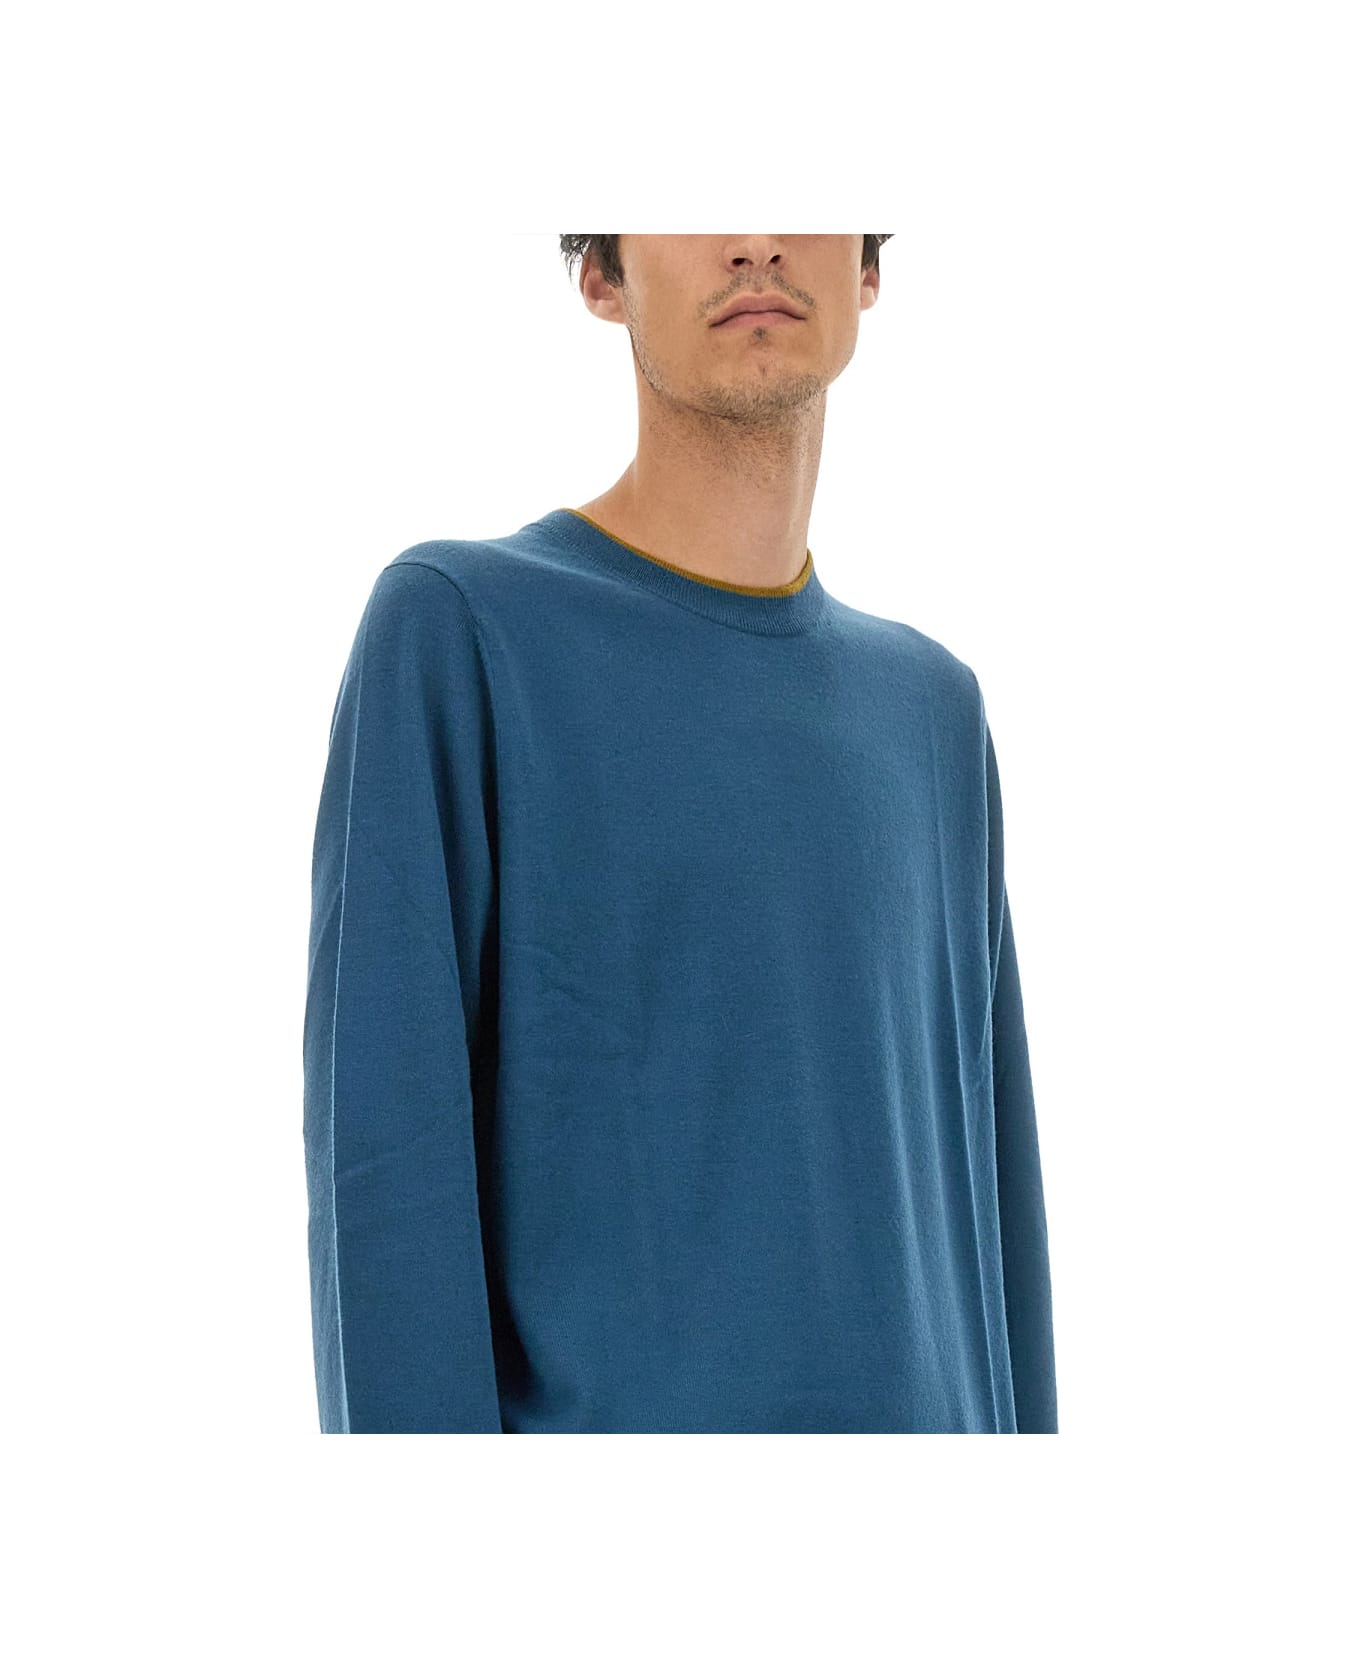 PS by Paul Smith Jersey With Logo - BLUE フリース